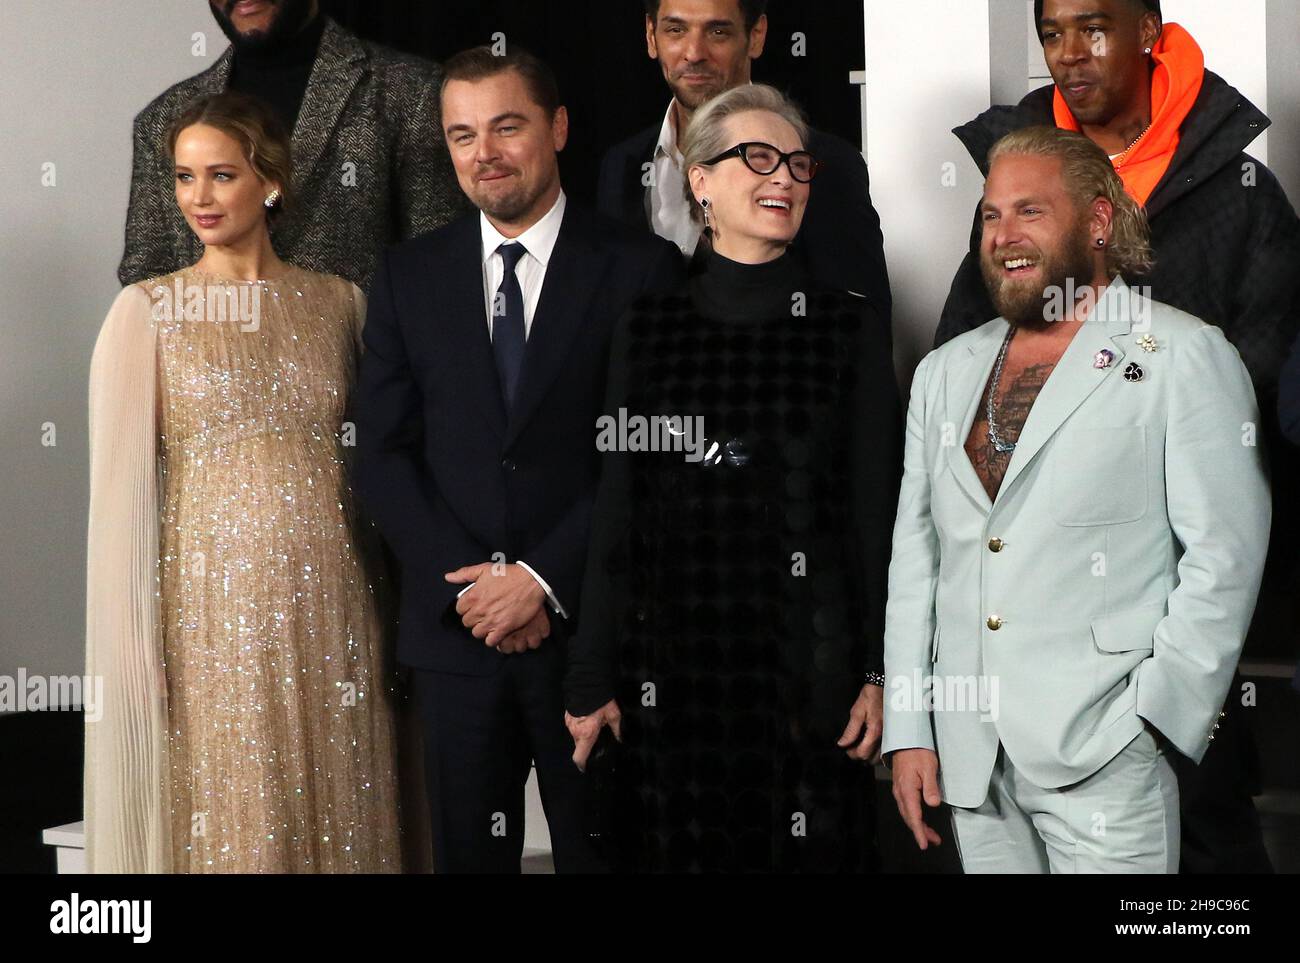 New York, NY, USA. 5th Dec, 2021. Jennifer Lawrence, Leonardo DiCaprio, Meryl Streep and Jonah Hill at the Netflix World Premiere Of Don't Look Up at Jazz At Lincoln Center in New York City on December 5, 2021. Credit: Rw/Media Punch/Alamy Live News Stock Photo